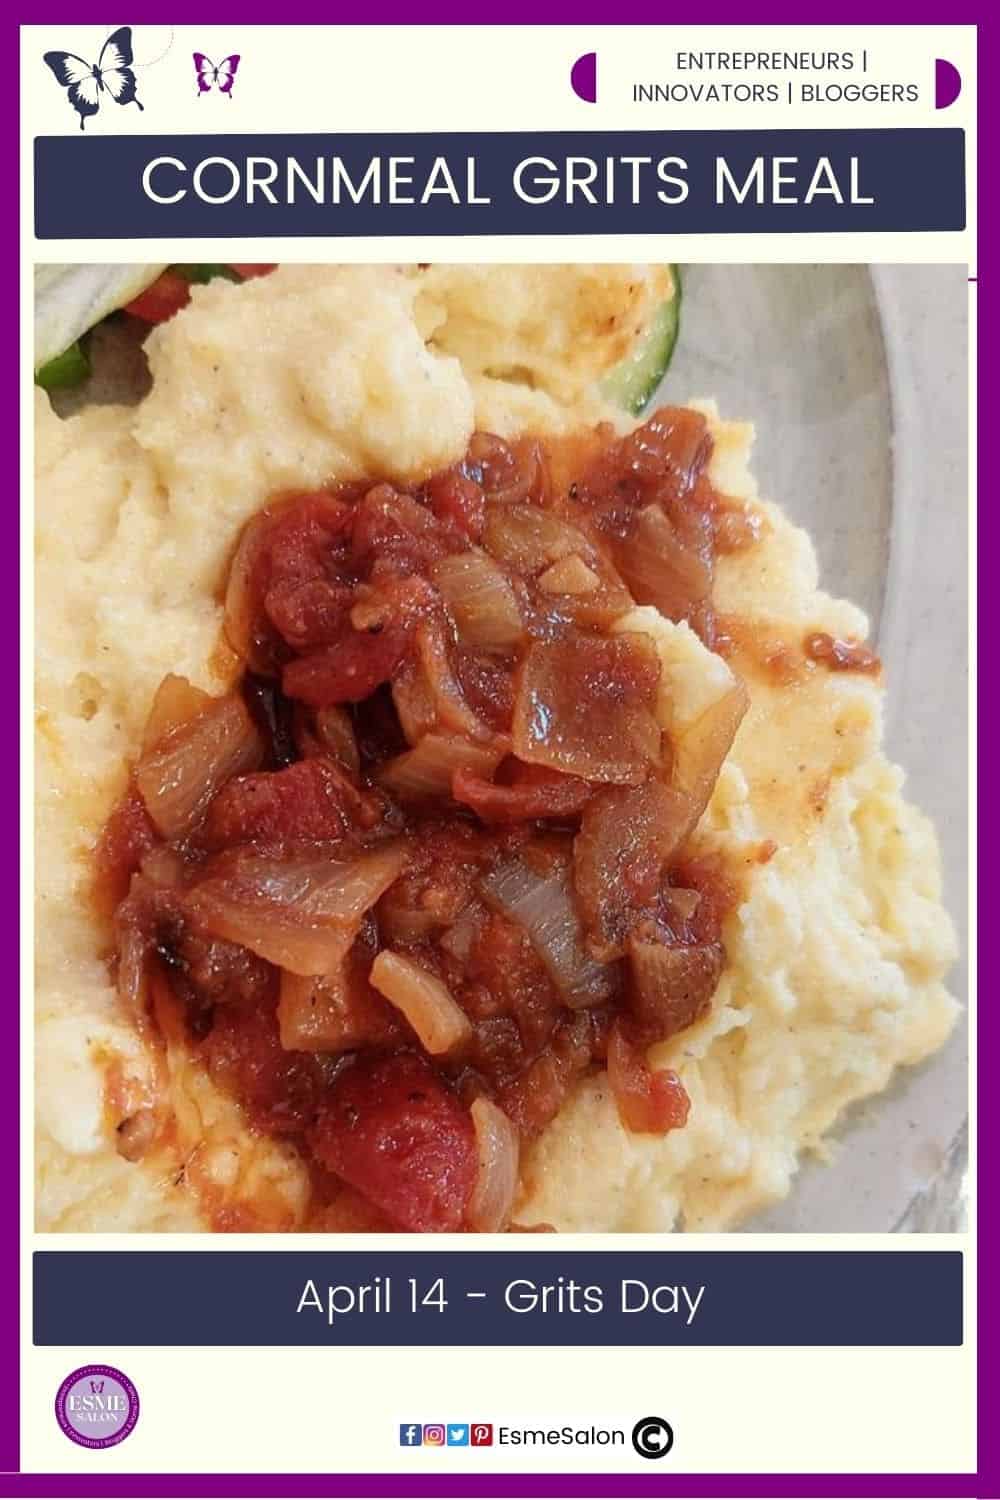 an image of a Cornmeal Grits Meal with tomato and onion sauce